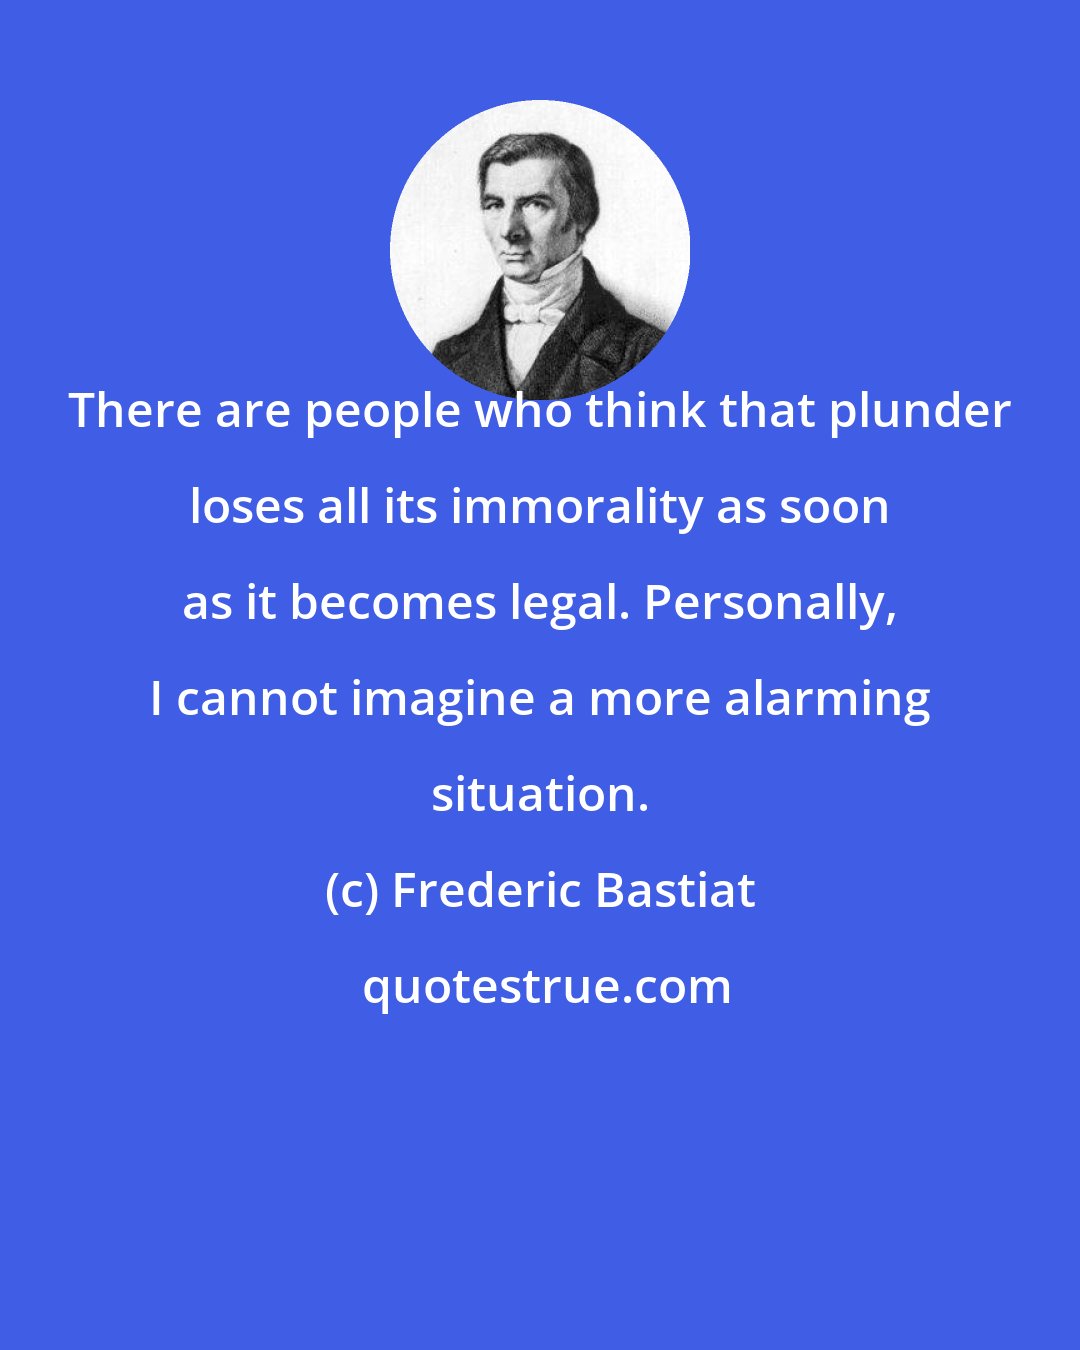 Frederic Bastiat: There are people who think that plunder loses all its immorality as soon as it becomes legal. Personally, I cannot imagine a more alarming situation.